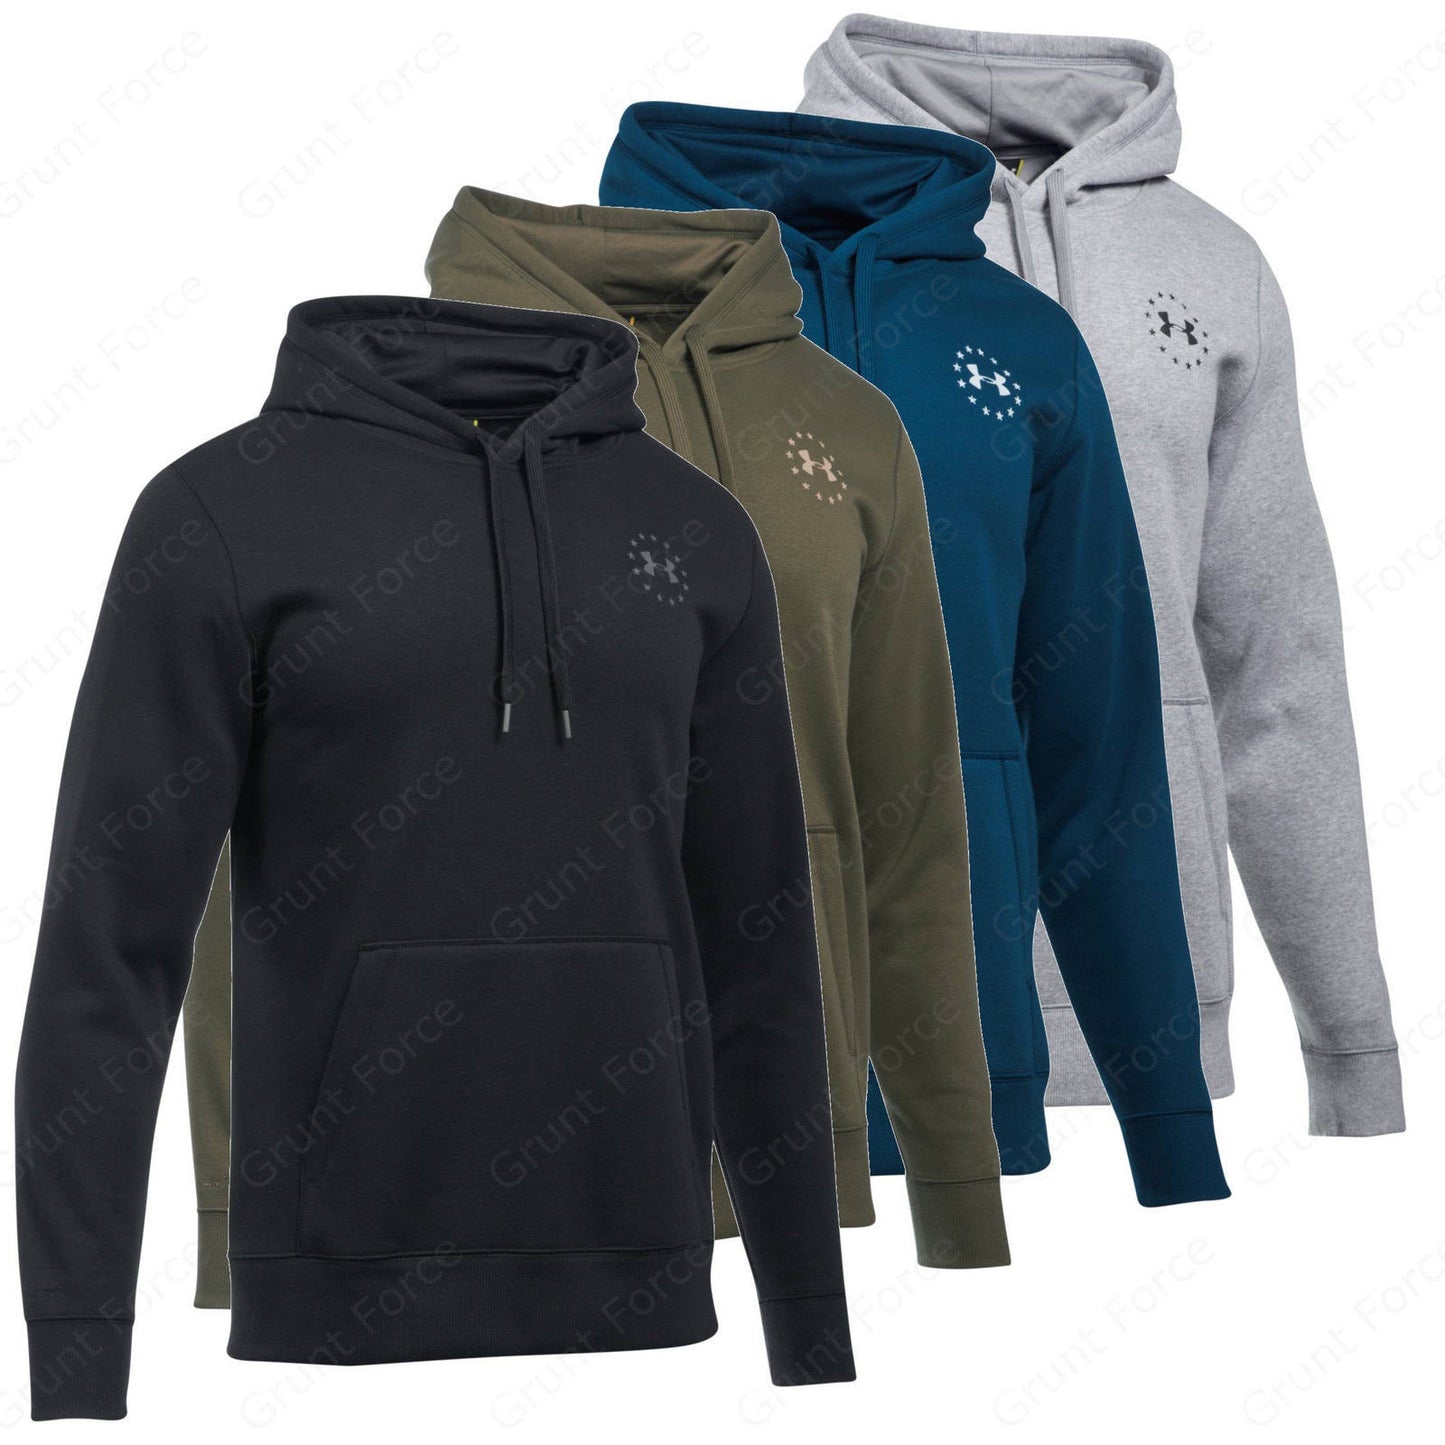 Under Armour Men's Sweatshirts - UA Freedom Flag Rival Tactical Hoodie